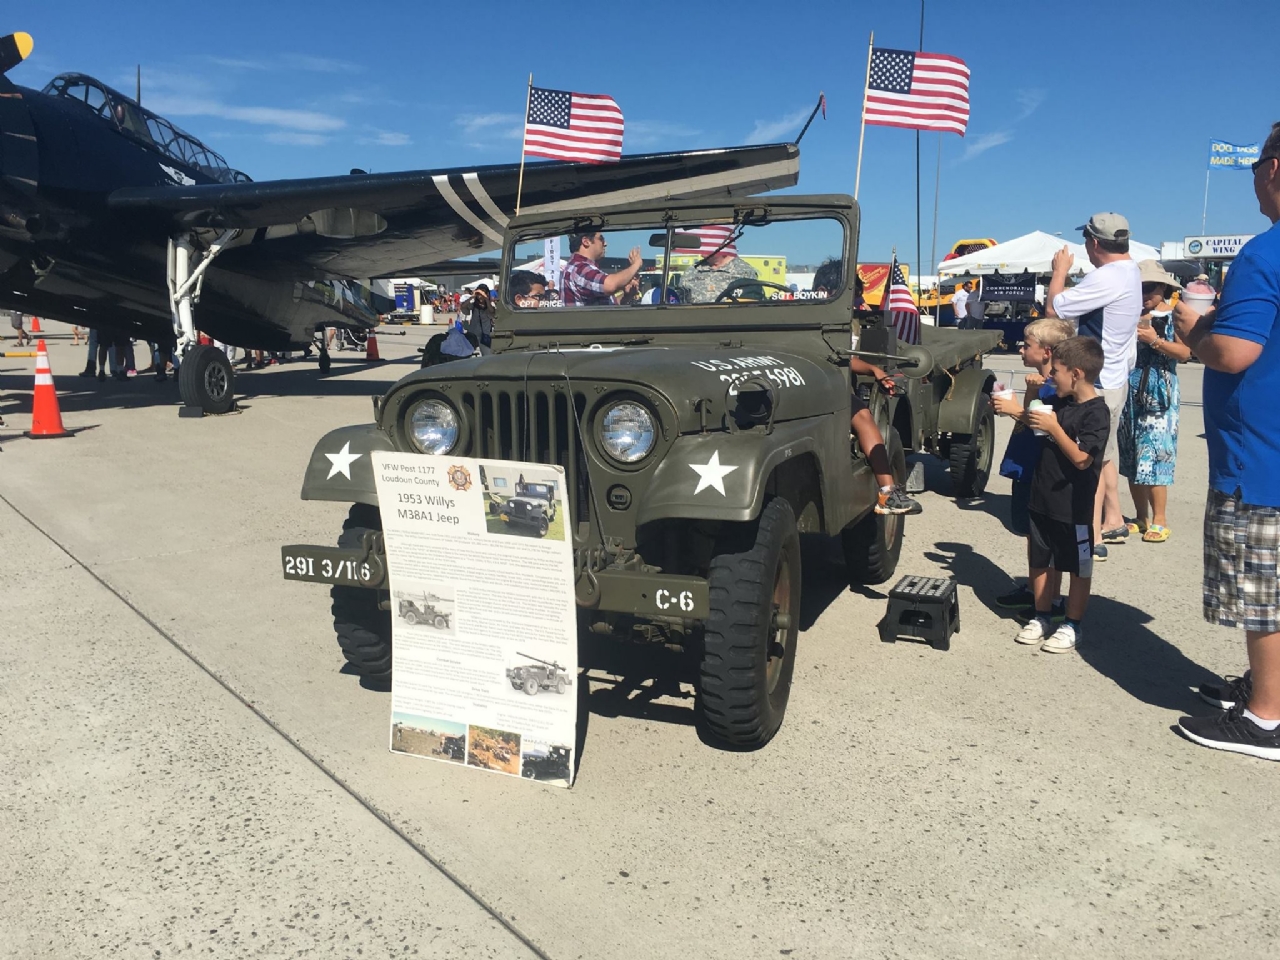 The Jeep was placed on the tarmac along with several aircraft